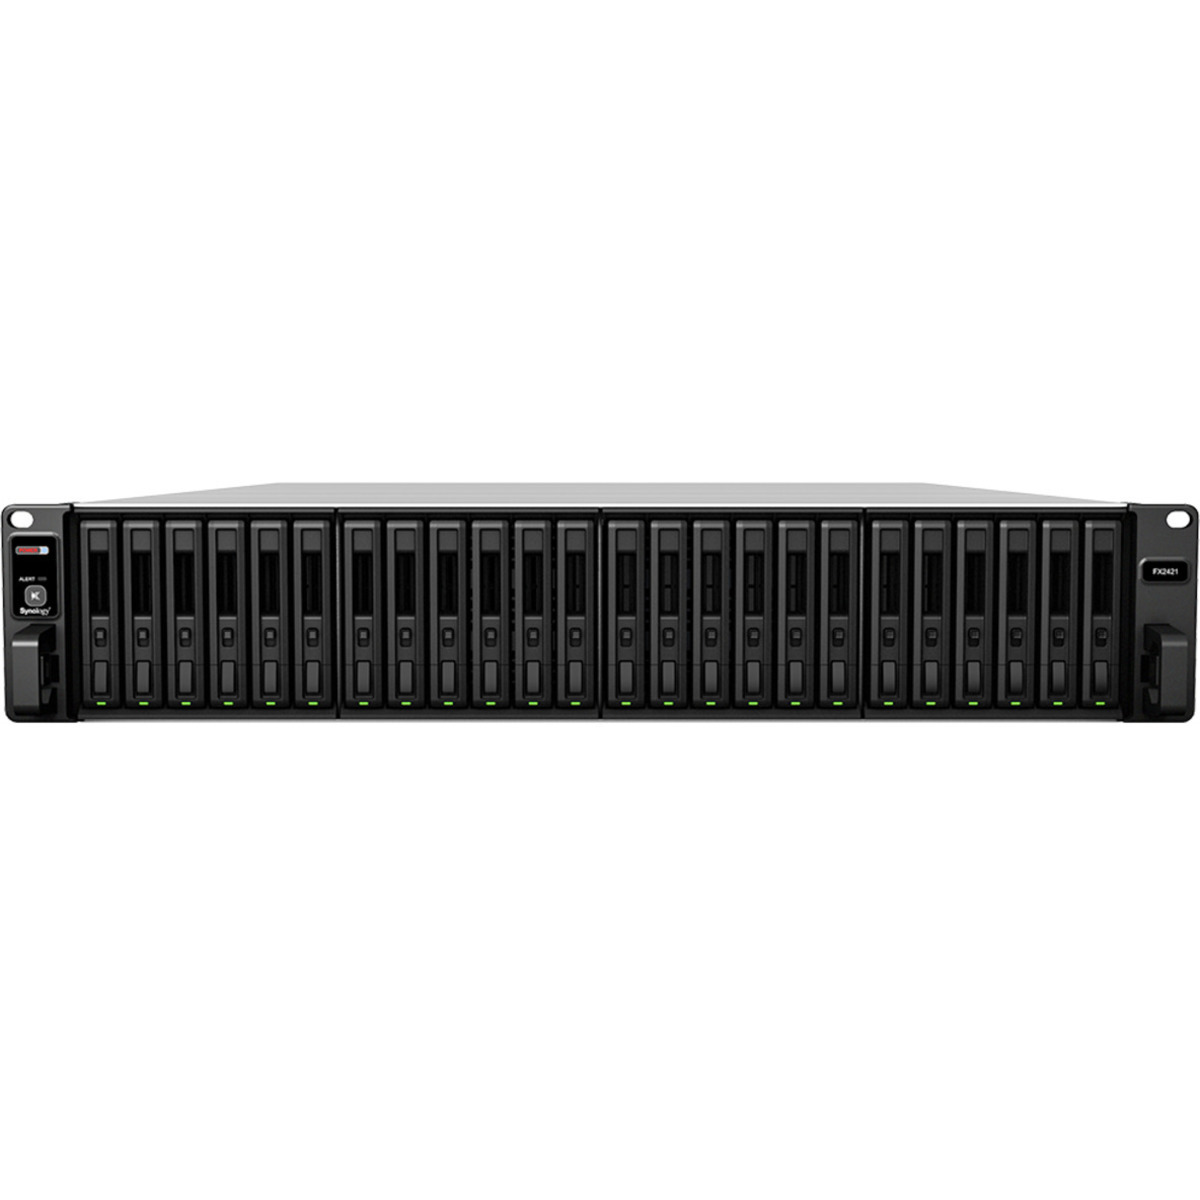 Synology FX2421 External Expansion Drive 18tb 24-Bay RackMount Large Business / Enterprise Expansion Enclosure 18x1tb Crucial MX500 CT1000MX500SSD1 2.5 560/510MB/s SATA 6Gb/s SSD CONSUMER Class Drives Installed - Burn-In Tested FX2421 External Expansion Drive